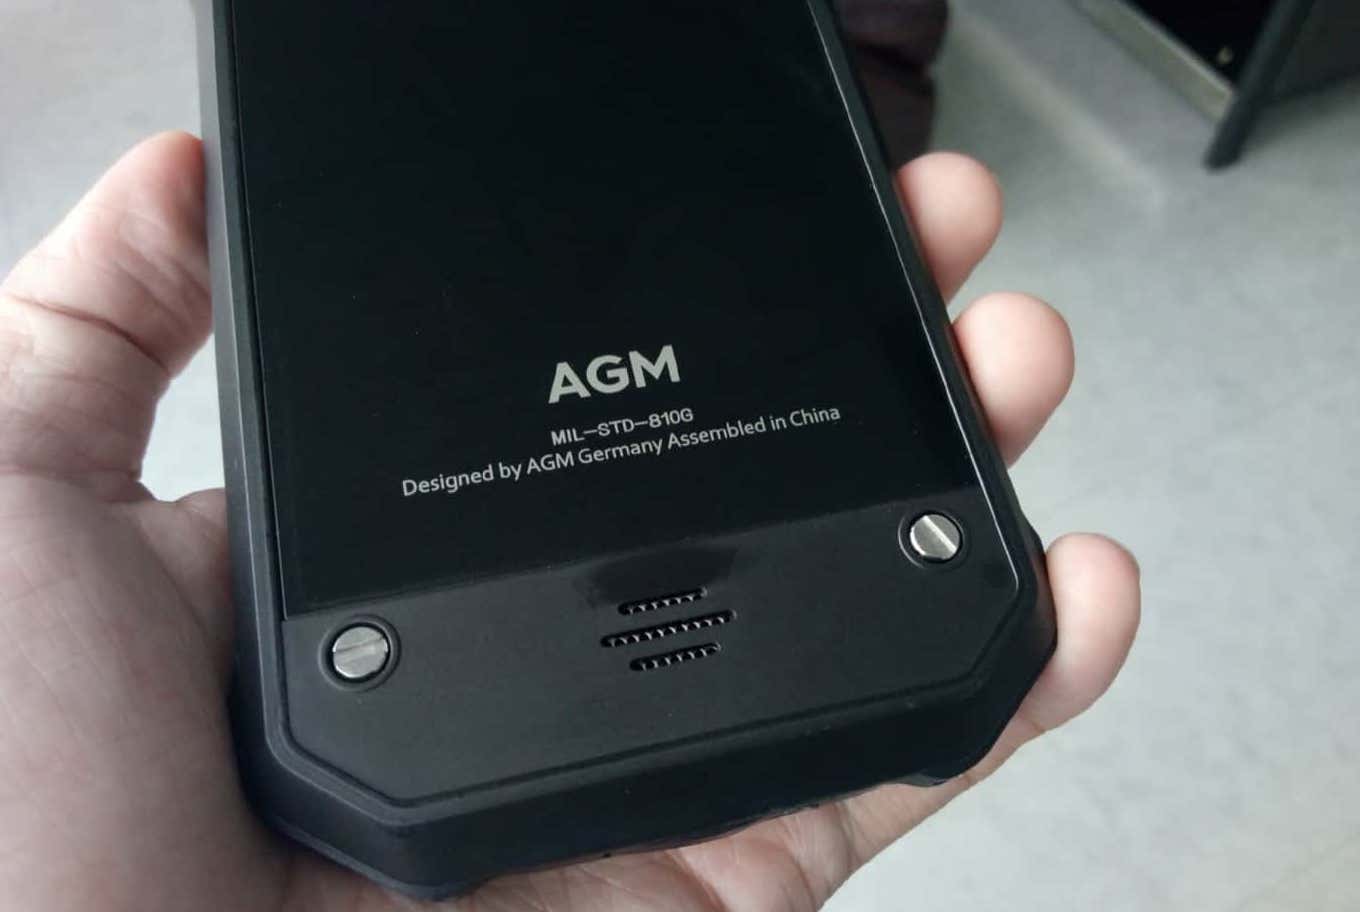 Mobile sensor of air contaminants will be released this month